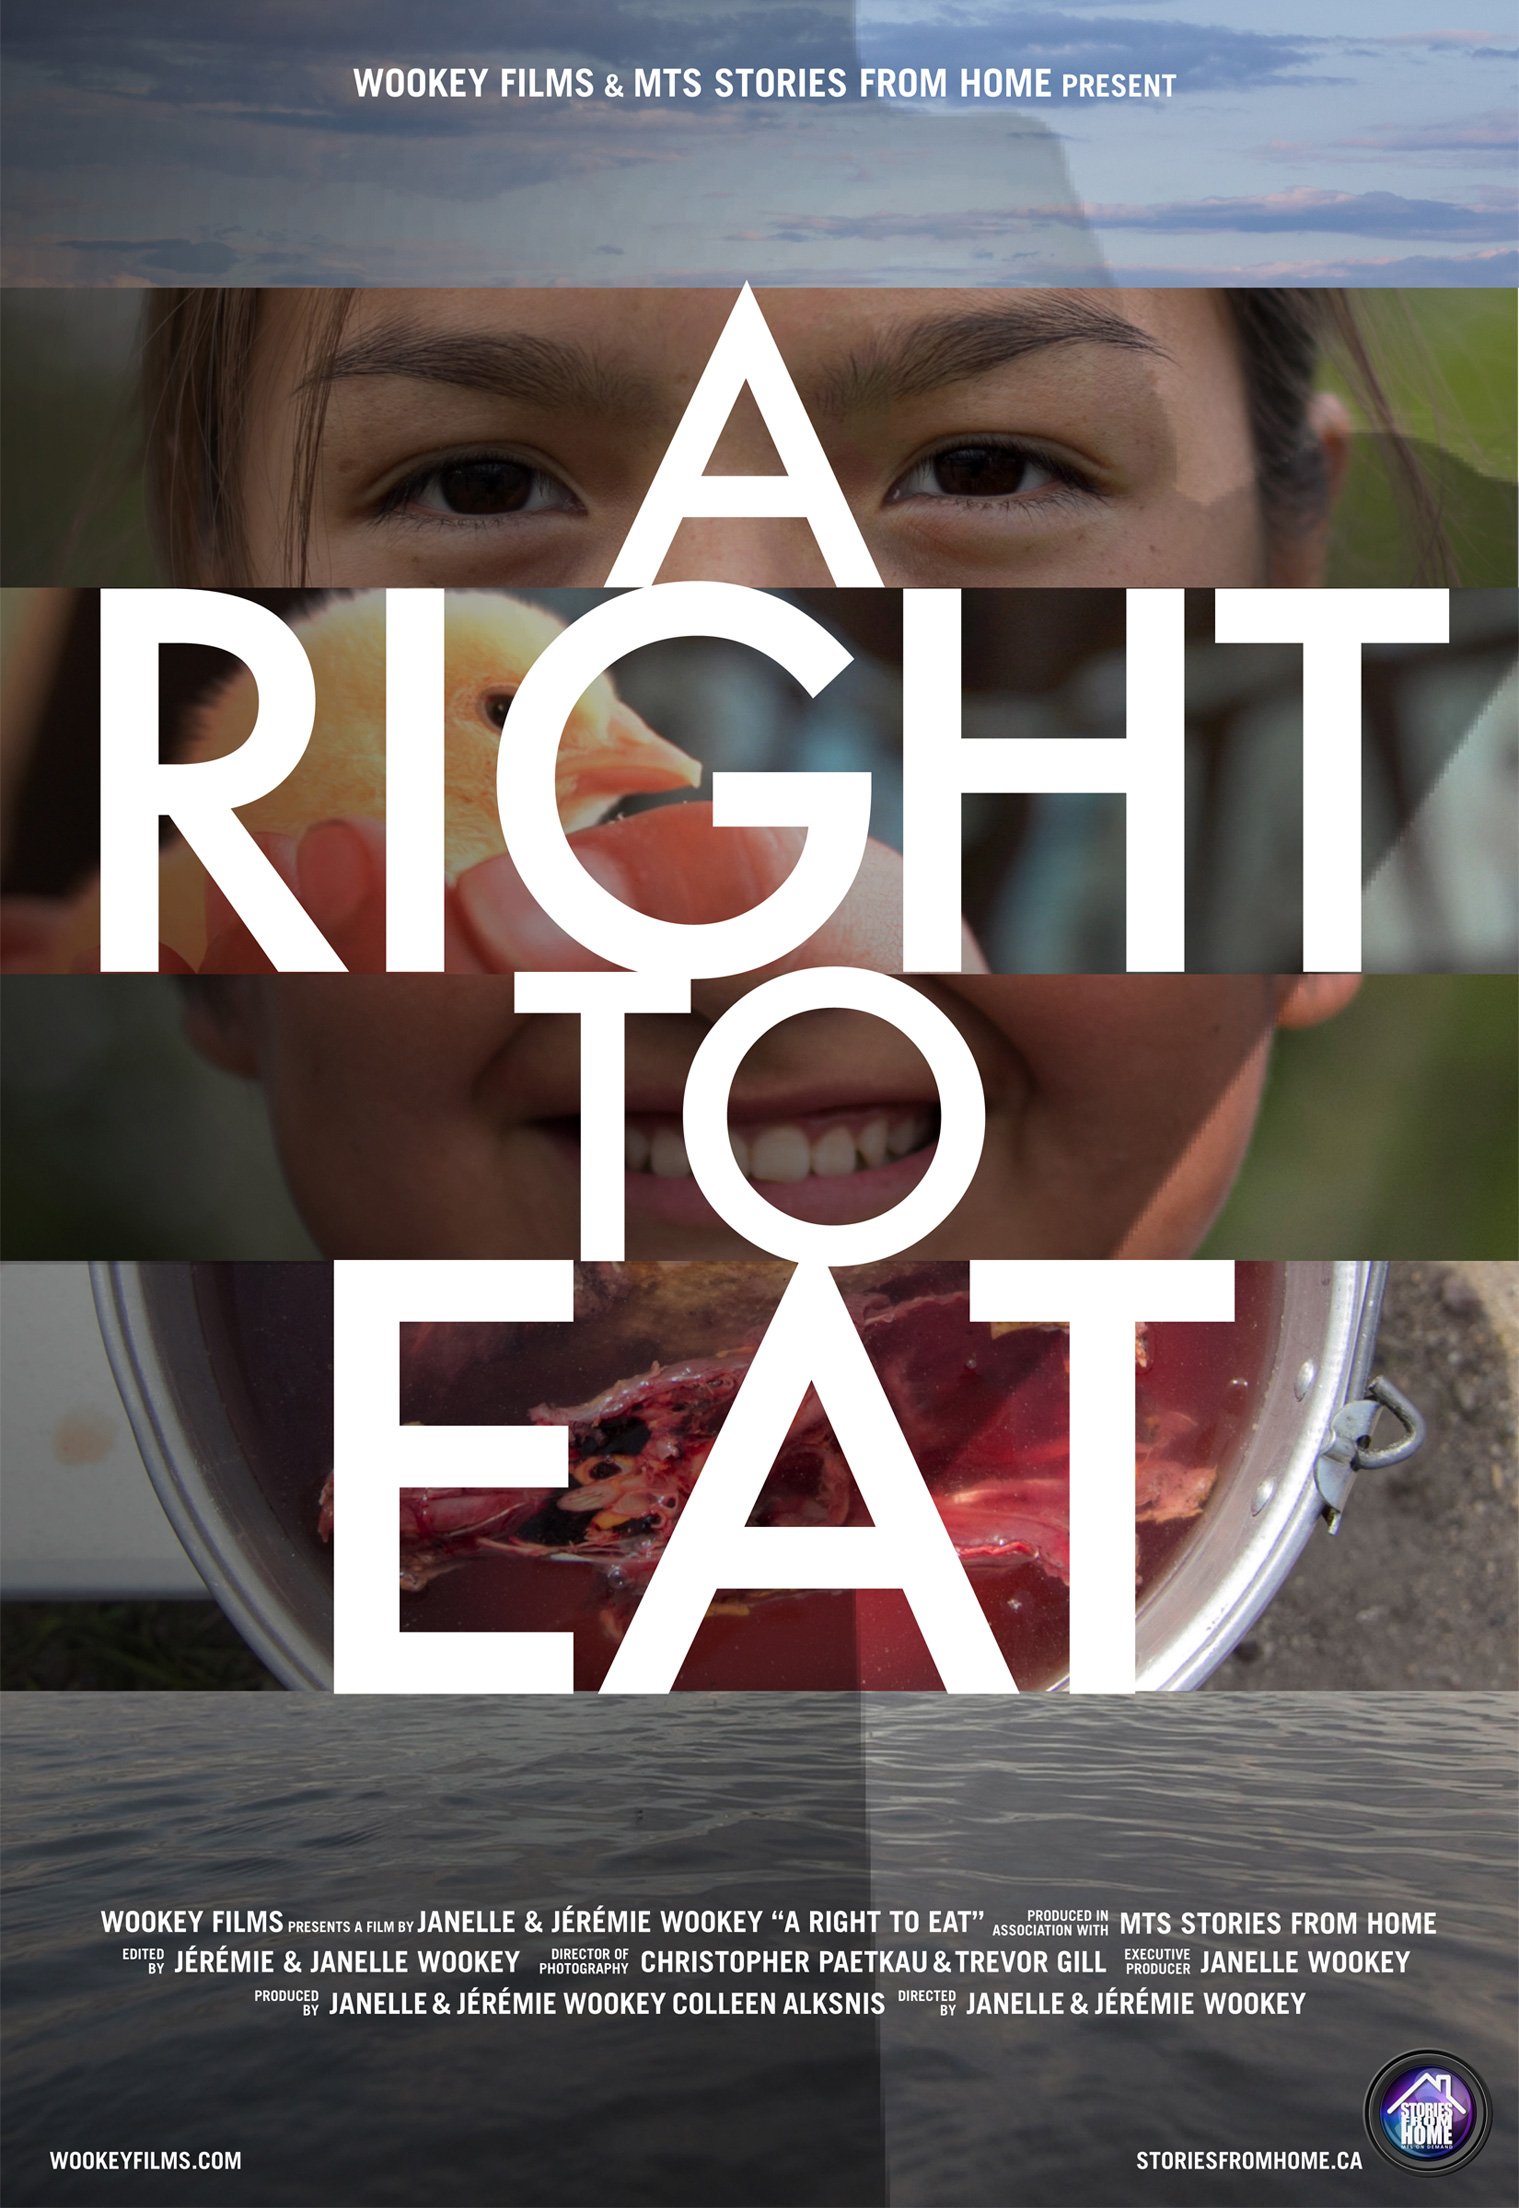 A Right to Eat